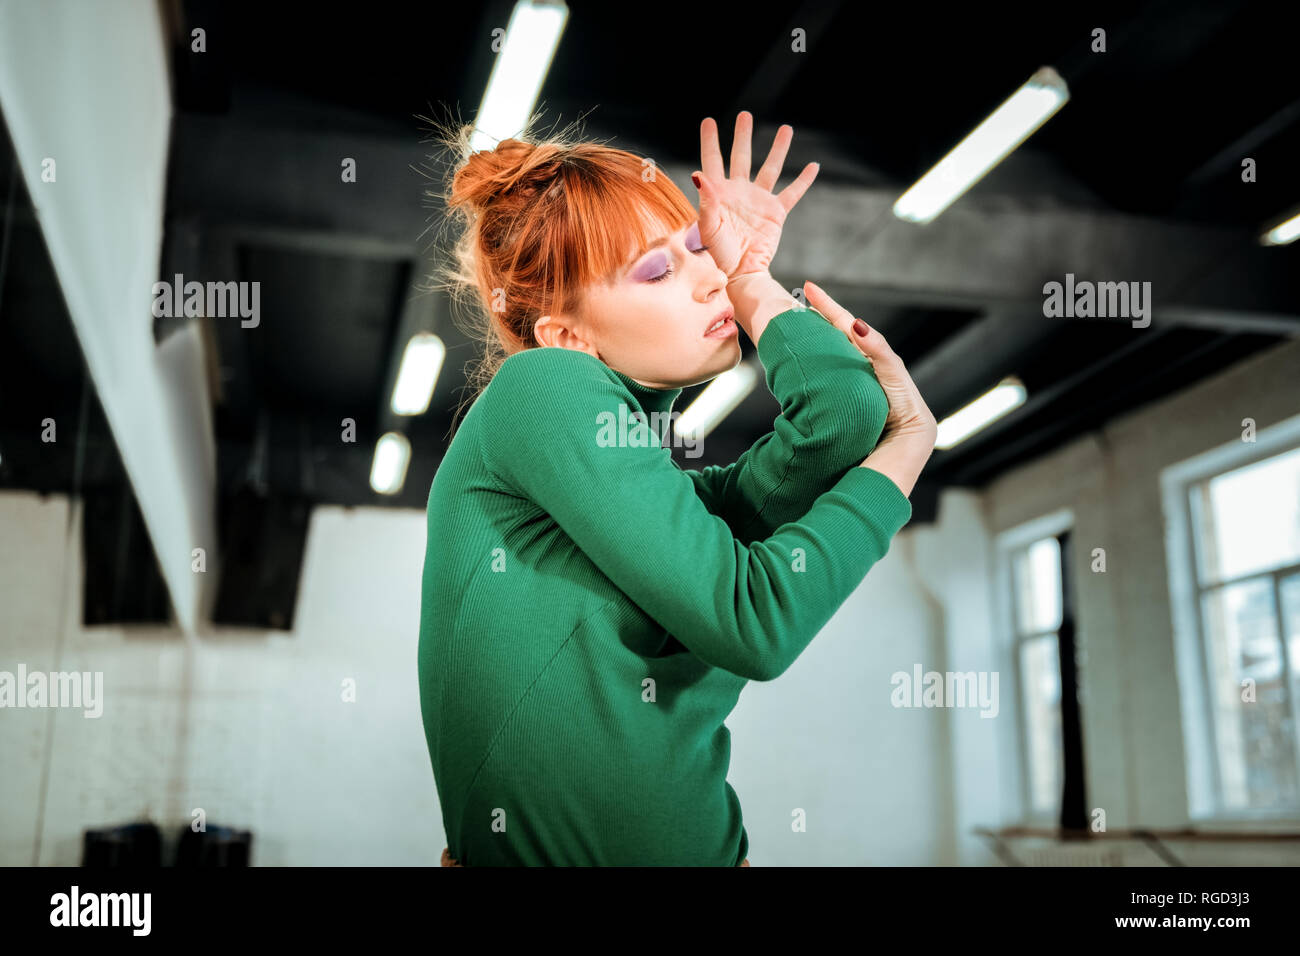 Young red-haired professional choreographer with bright makeup looking flexible Stock Photo